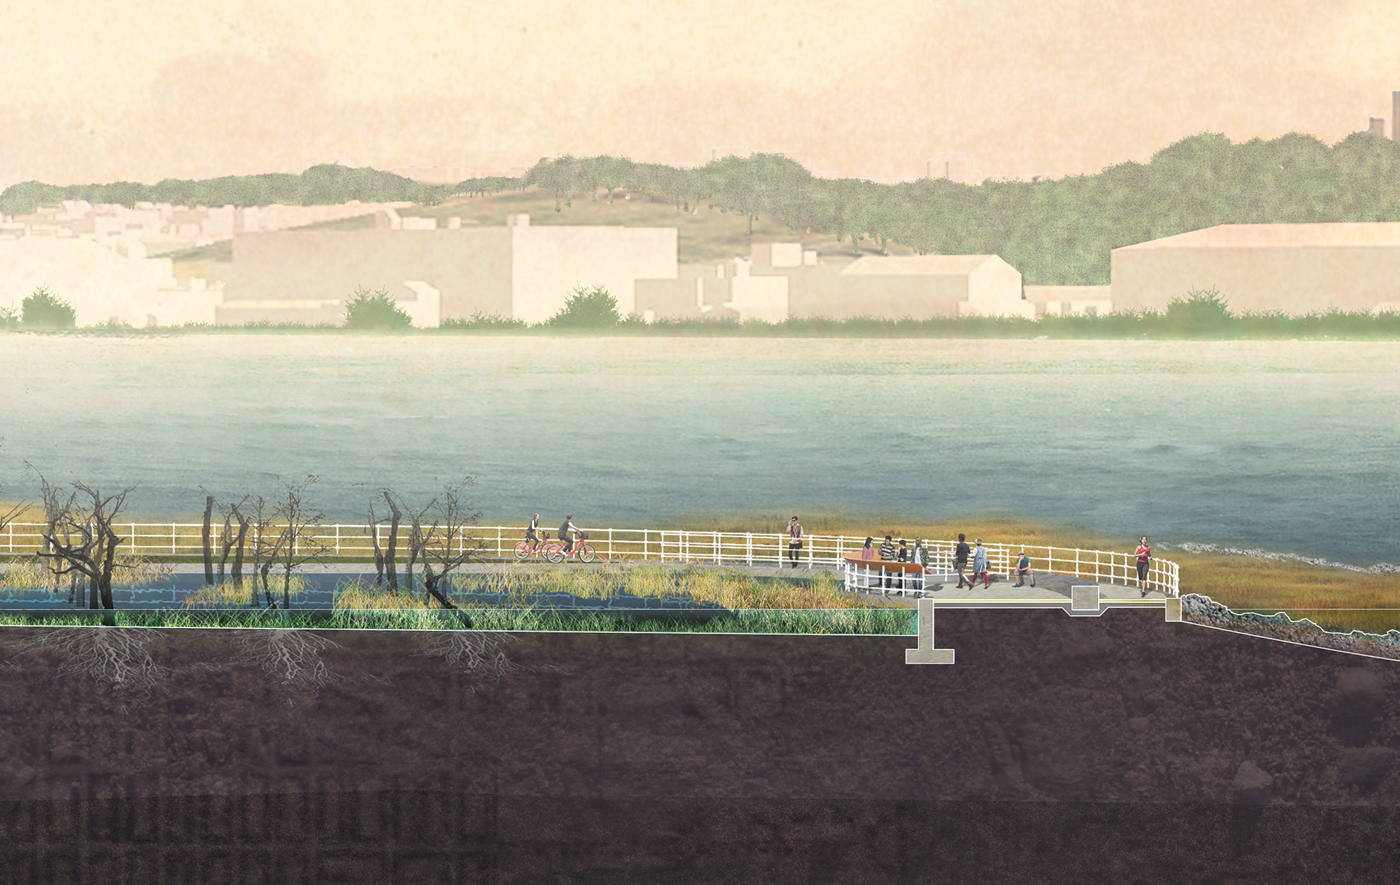 Section at the southern apex of Hains Point in East Potomac Park. The memorial conceptually straddles the successes and failings of American ingenuity. It records our questions about a coming epoch of potentially insurmountable challenges in a Tidal Basin that is an embodiment of traditional control-driven engineering, led by Peter Conover Hains, the Point's namesake engineer.